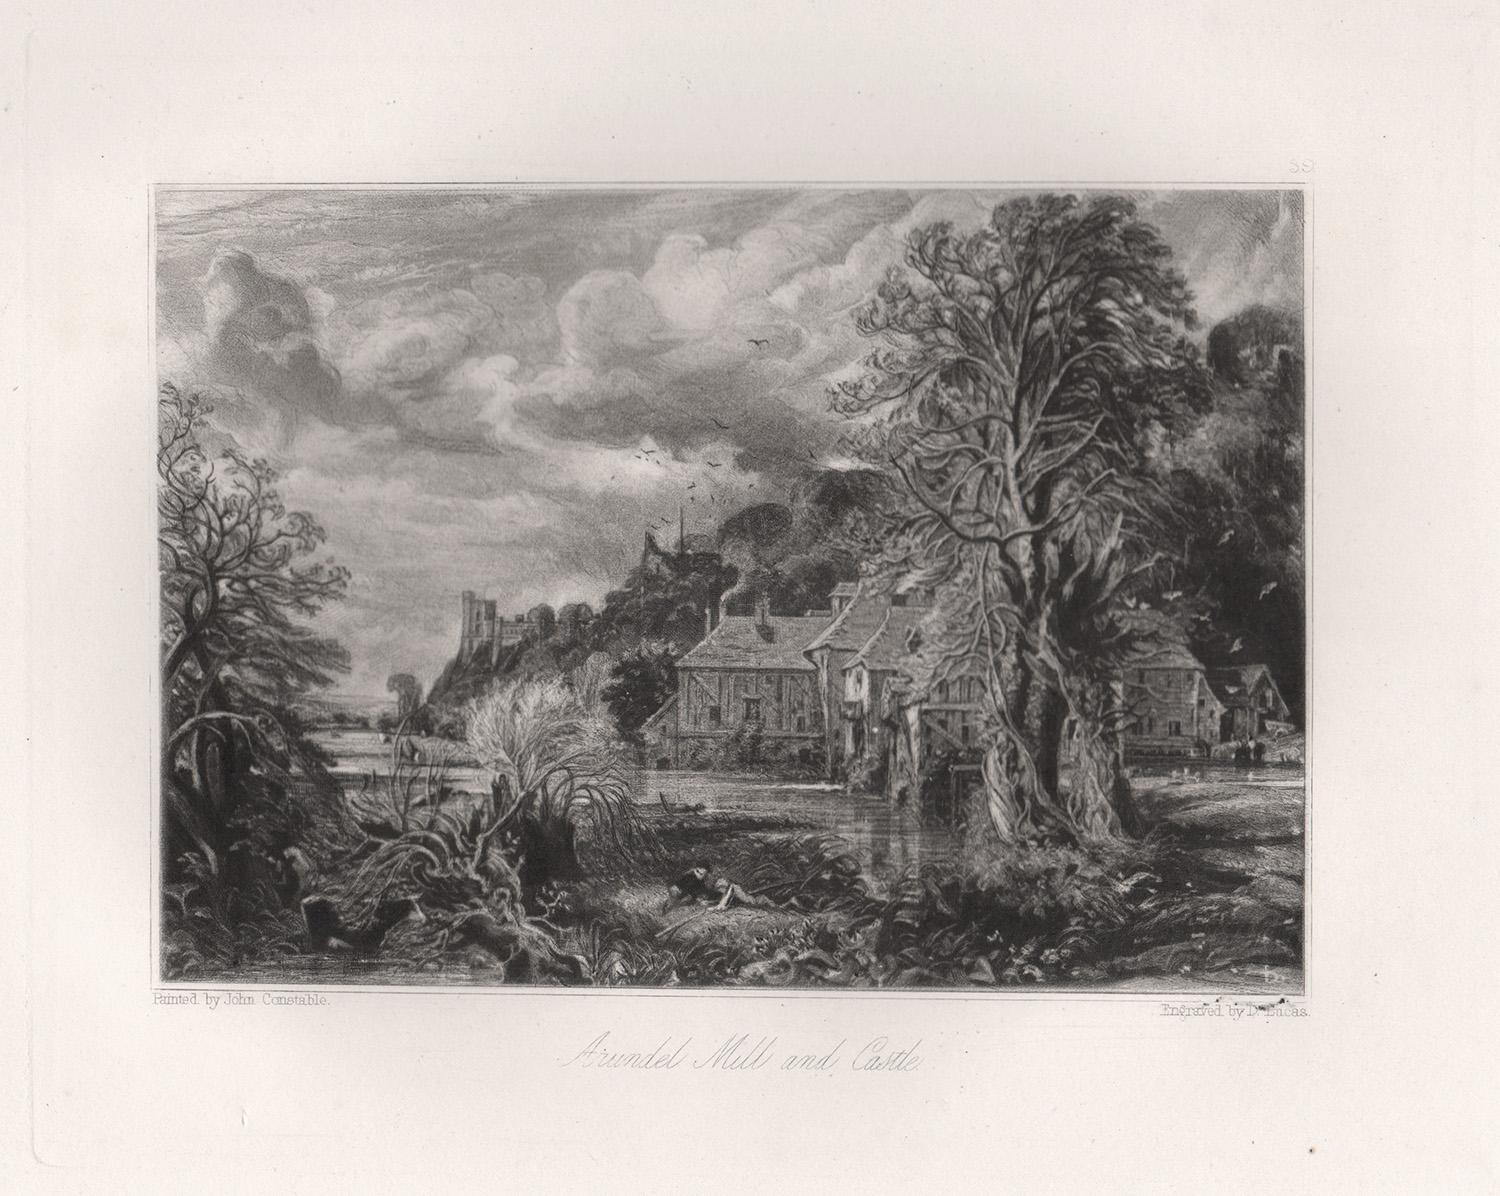 Arundel Mill and Castle. Mezzotint by David Lucas after John Constable, 1855